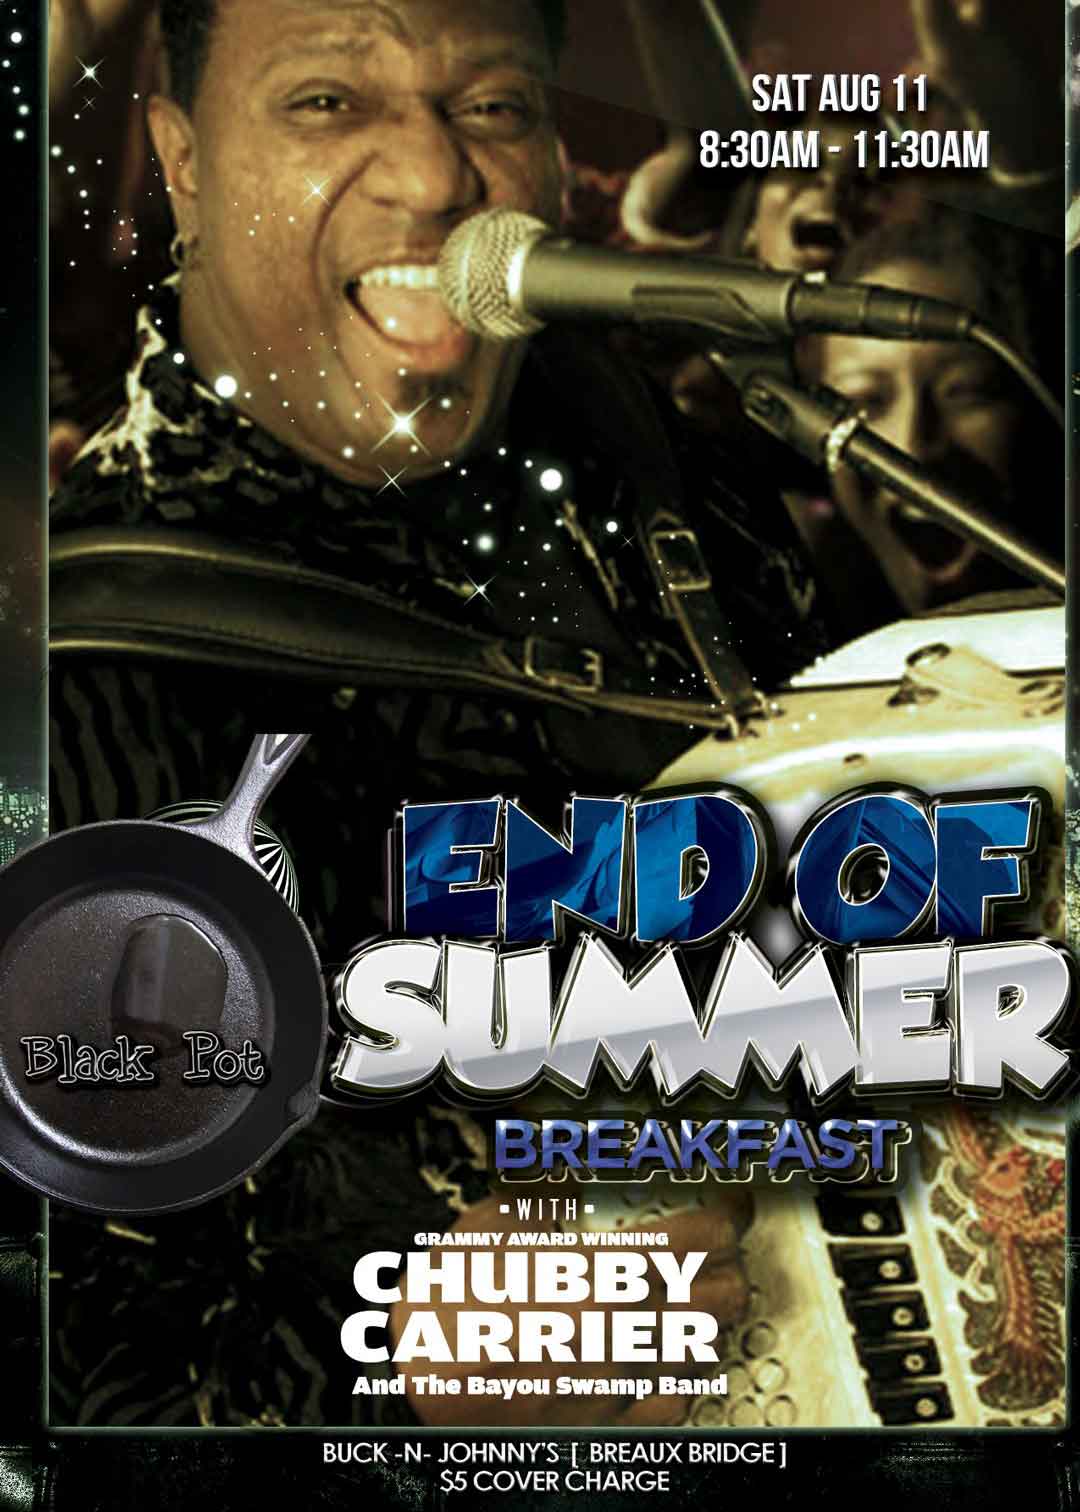 chubby carrier end of summer event flyer 1 1